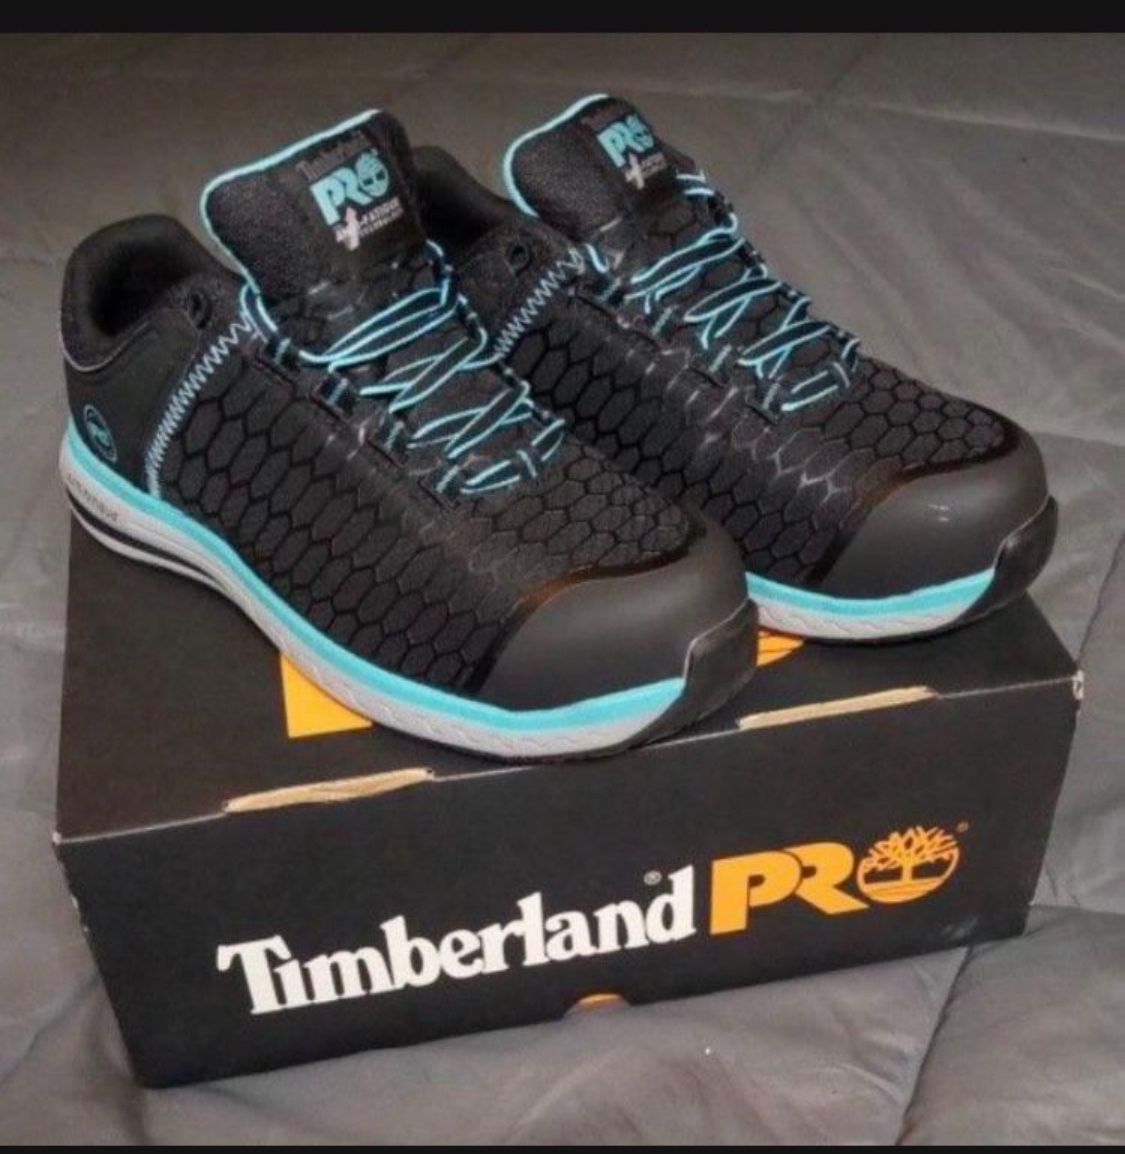 Timberland Pro Composite Toe Women's Shoes - Anti Fatigue 